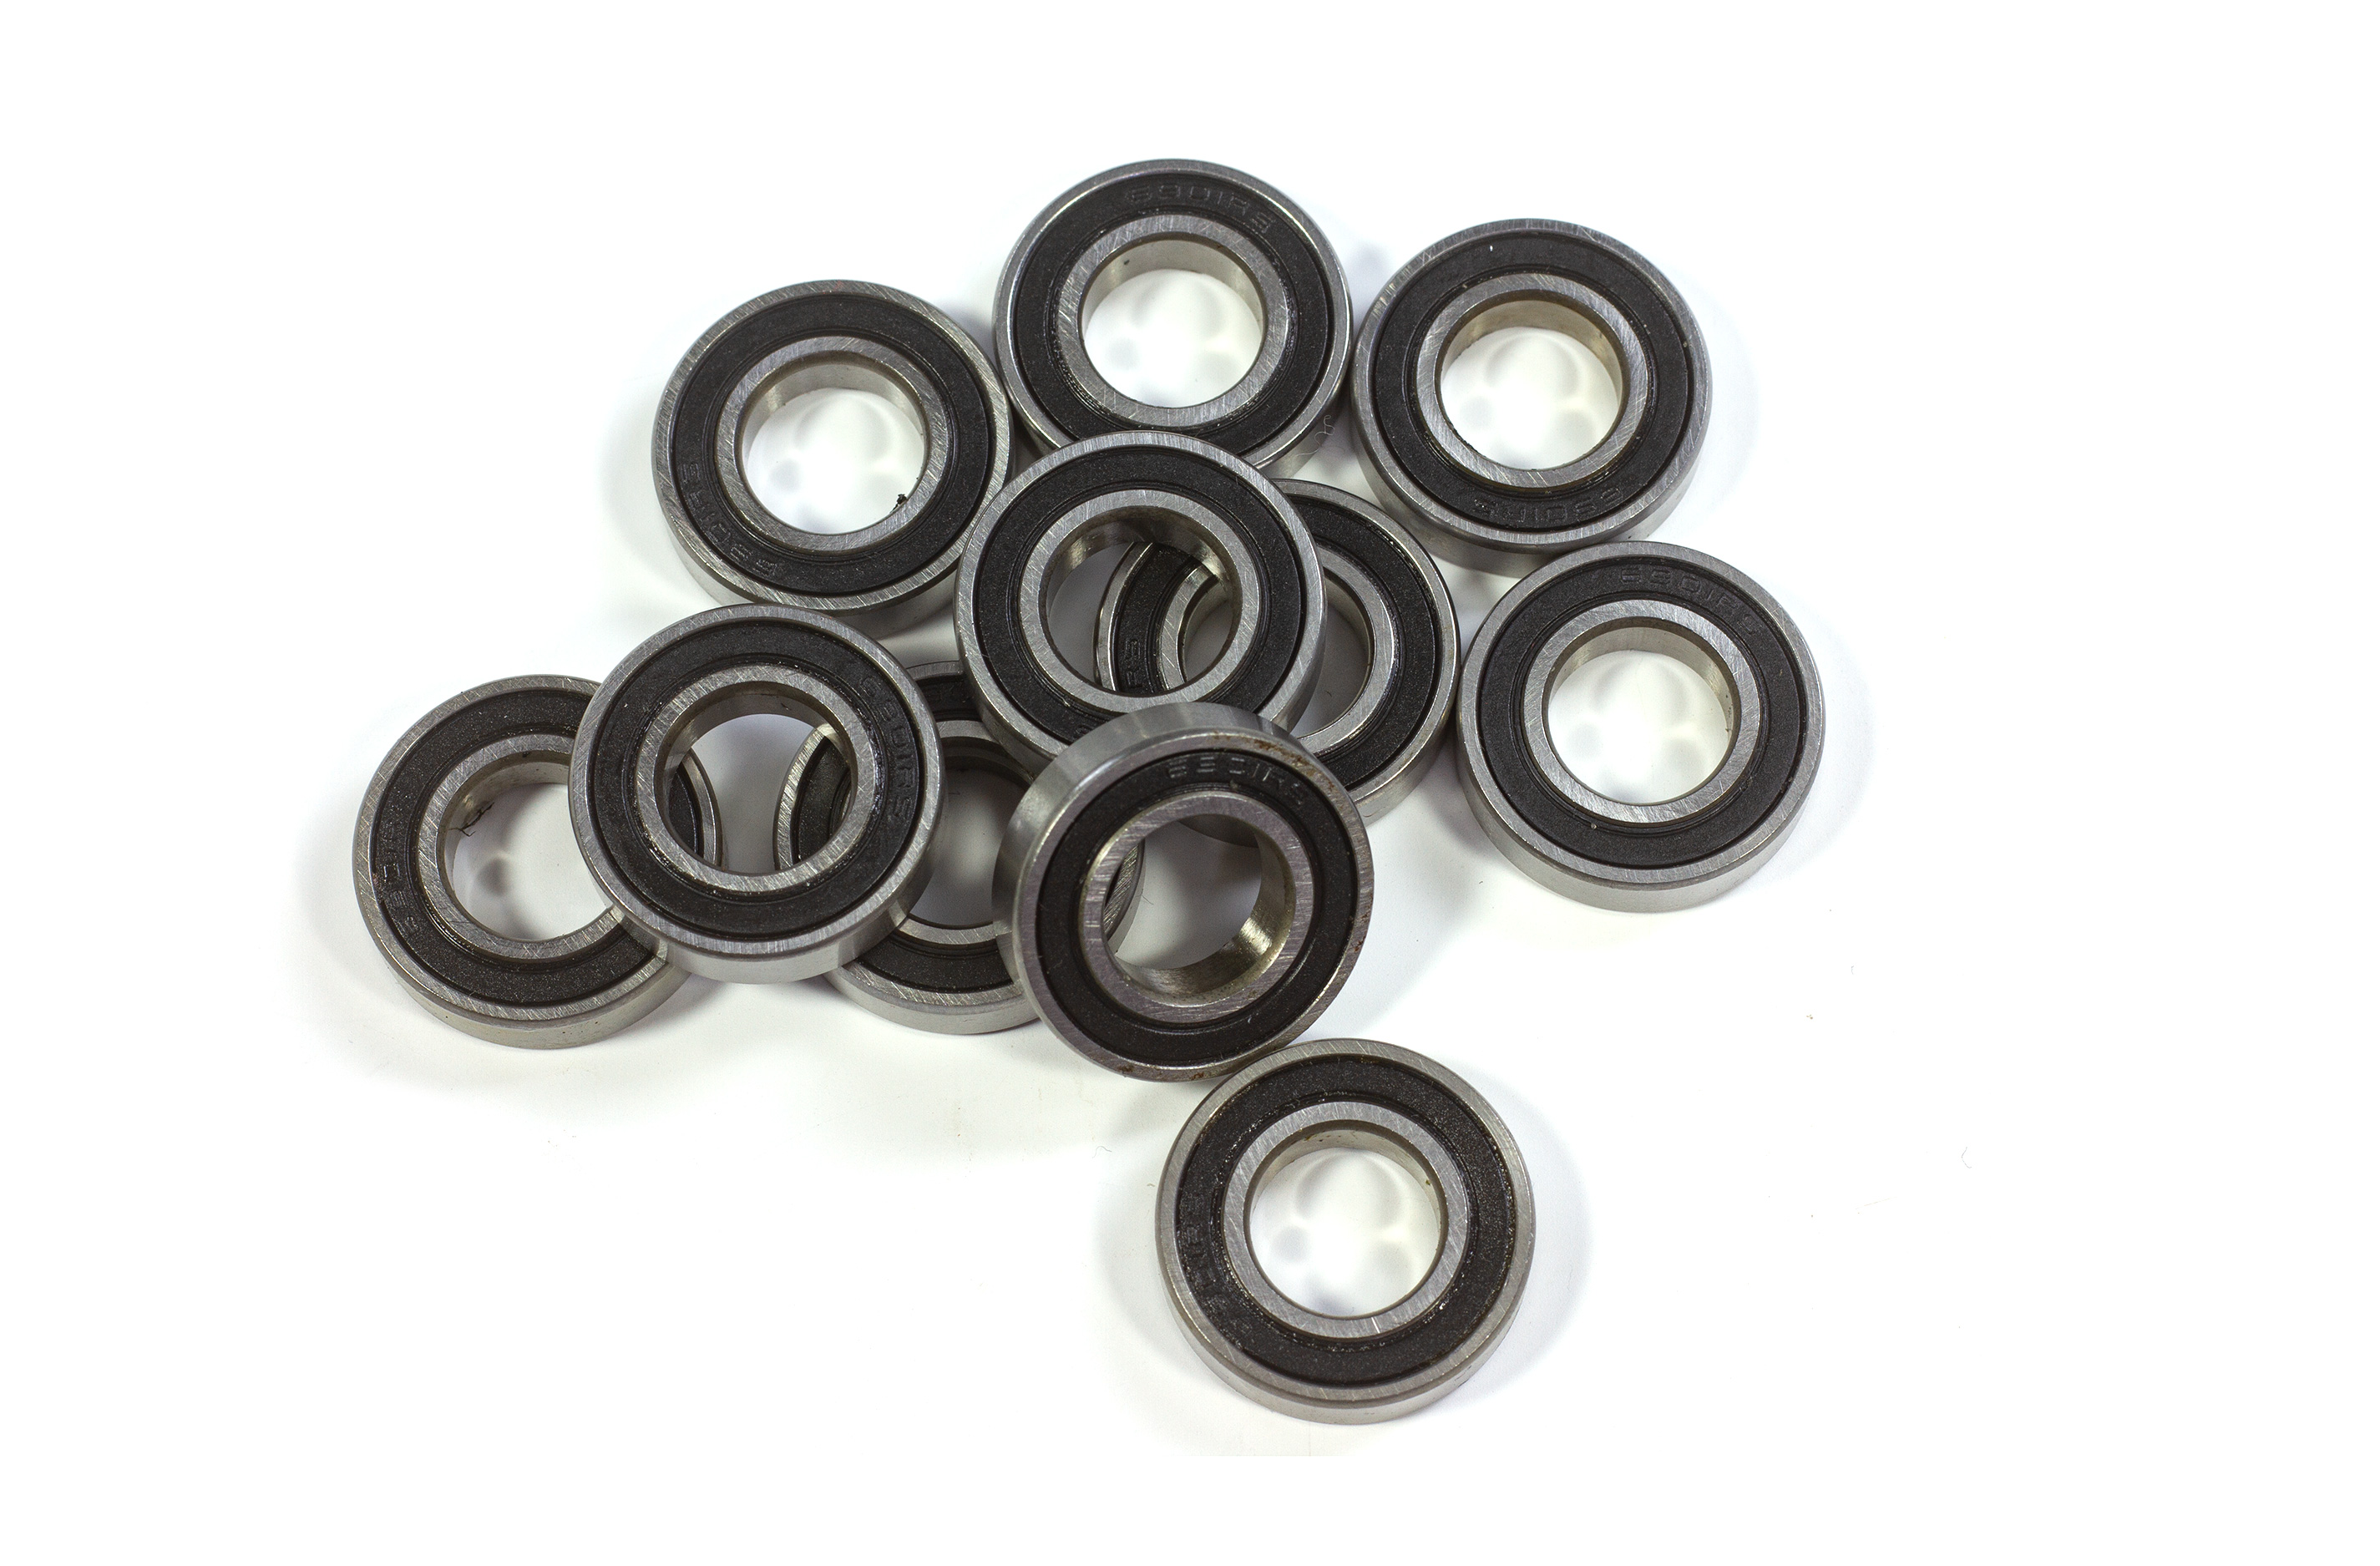 D03 Carson Ball bearing 12x24x6 mm set for Wild GP Attack